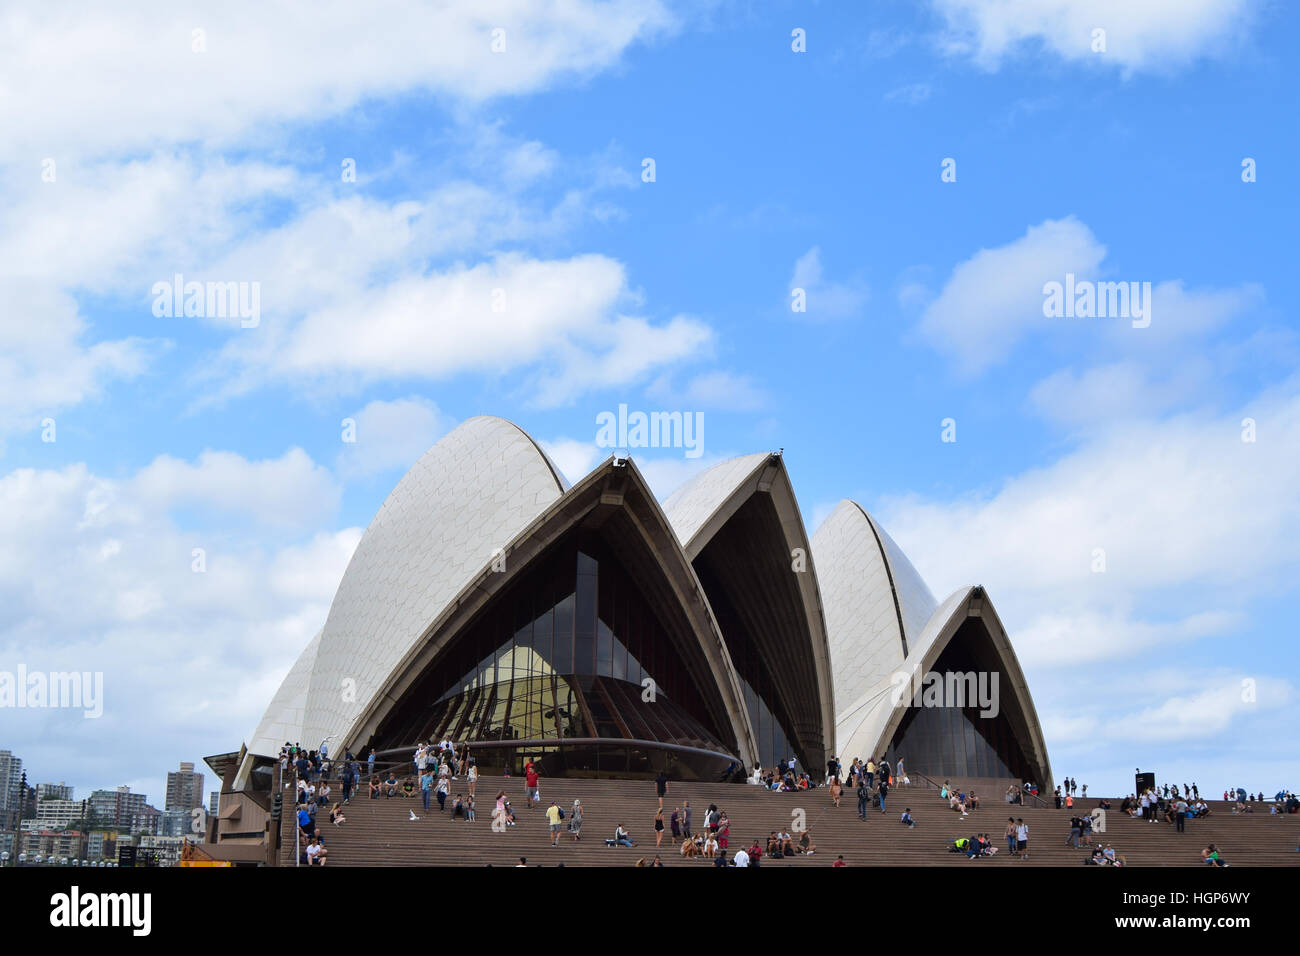 The Sydney Opera House SOH on Bennelong Point next to the Sydney Harbor Bridge and Harbor in Australia, New South Wales Stock Photo